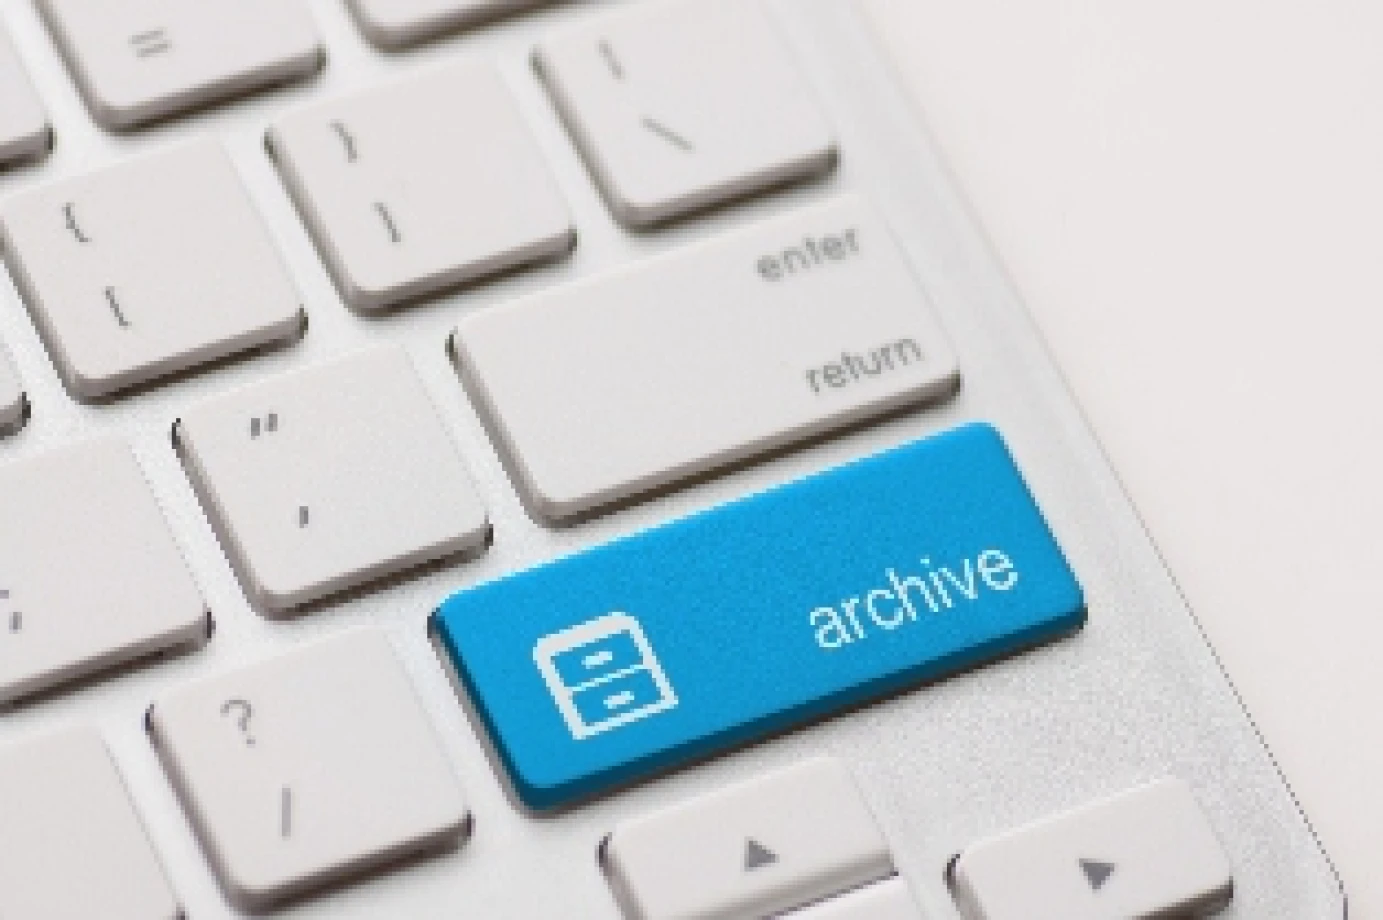 Archive of the Month – a gift to genealogists and researchers